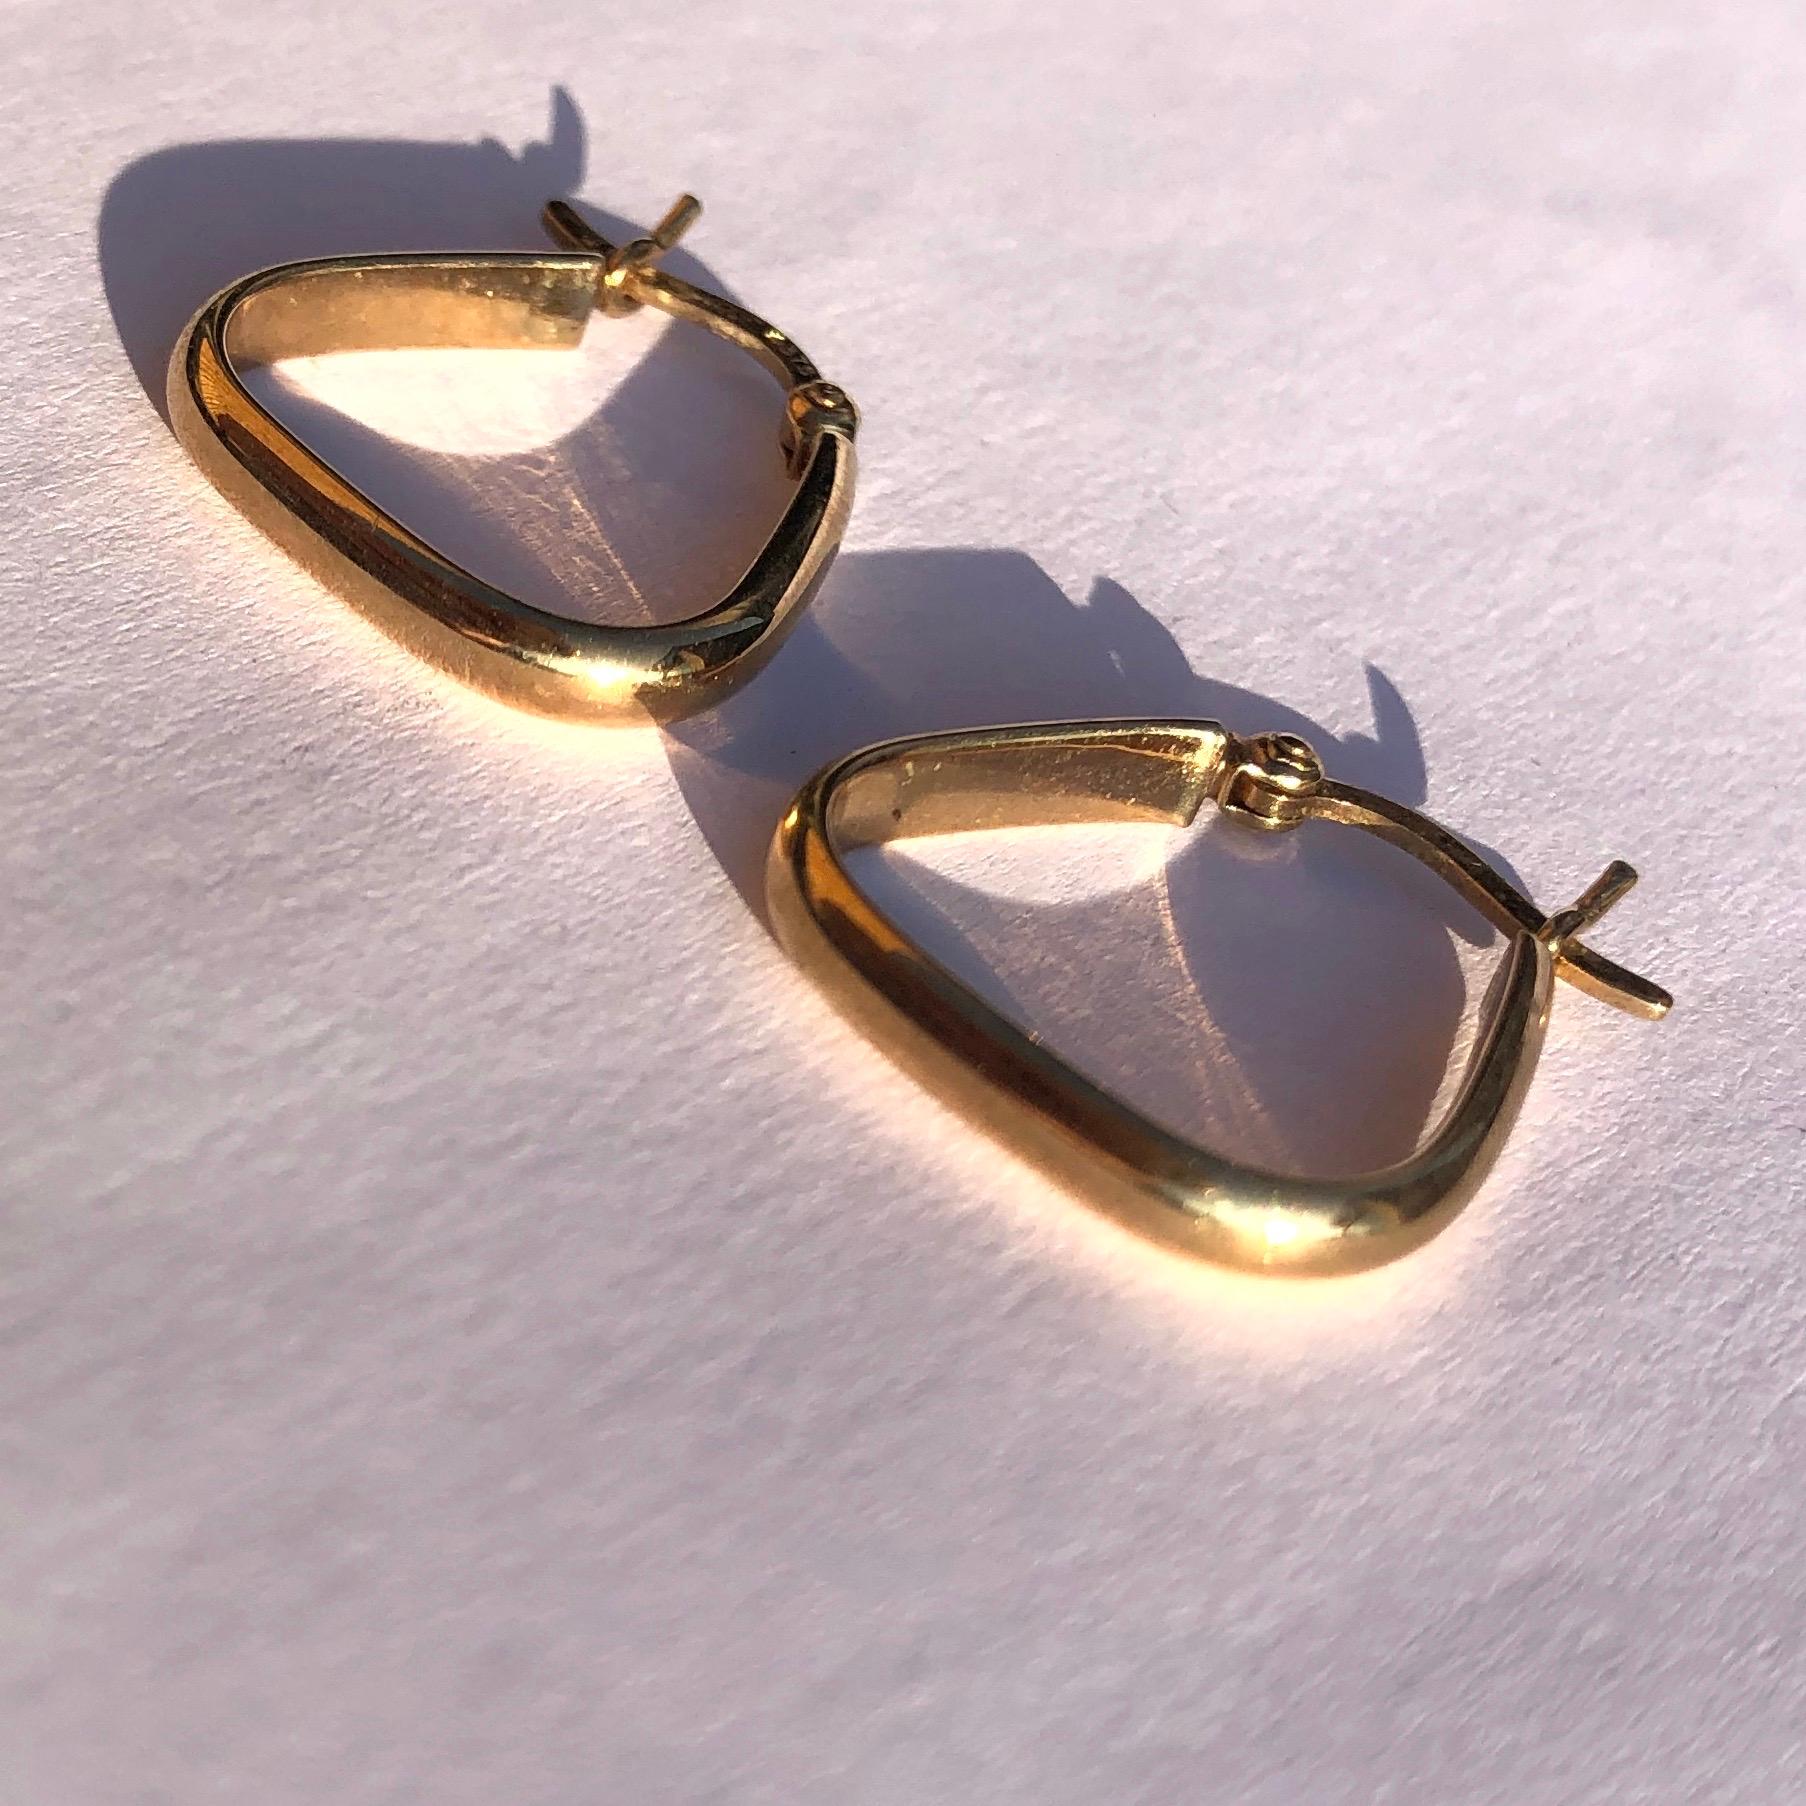 The earrings are modelled out of 9ct yellow gold and are a rounded triangle shape. They fasten with an easy push clip. 

Hoop Dimensions: 17x16mm 

Weight: 1.2g 